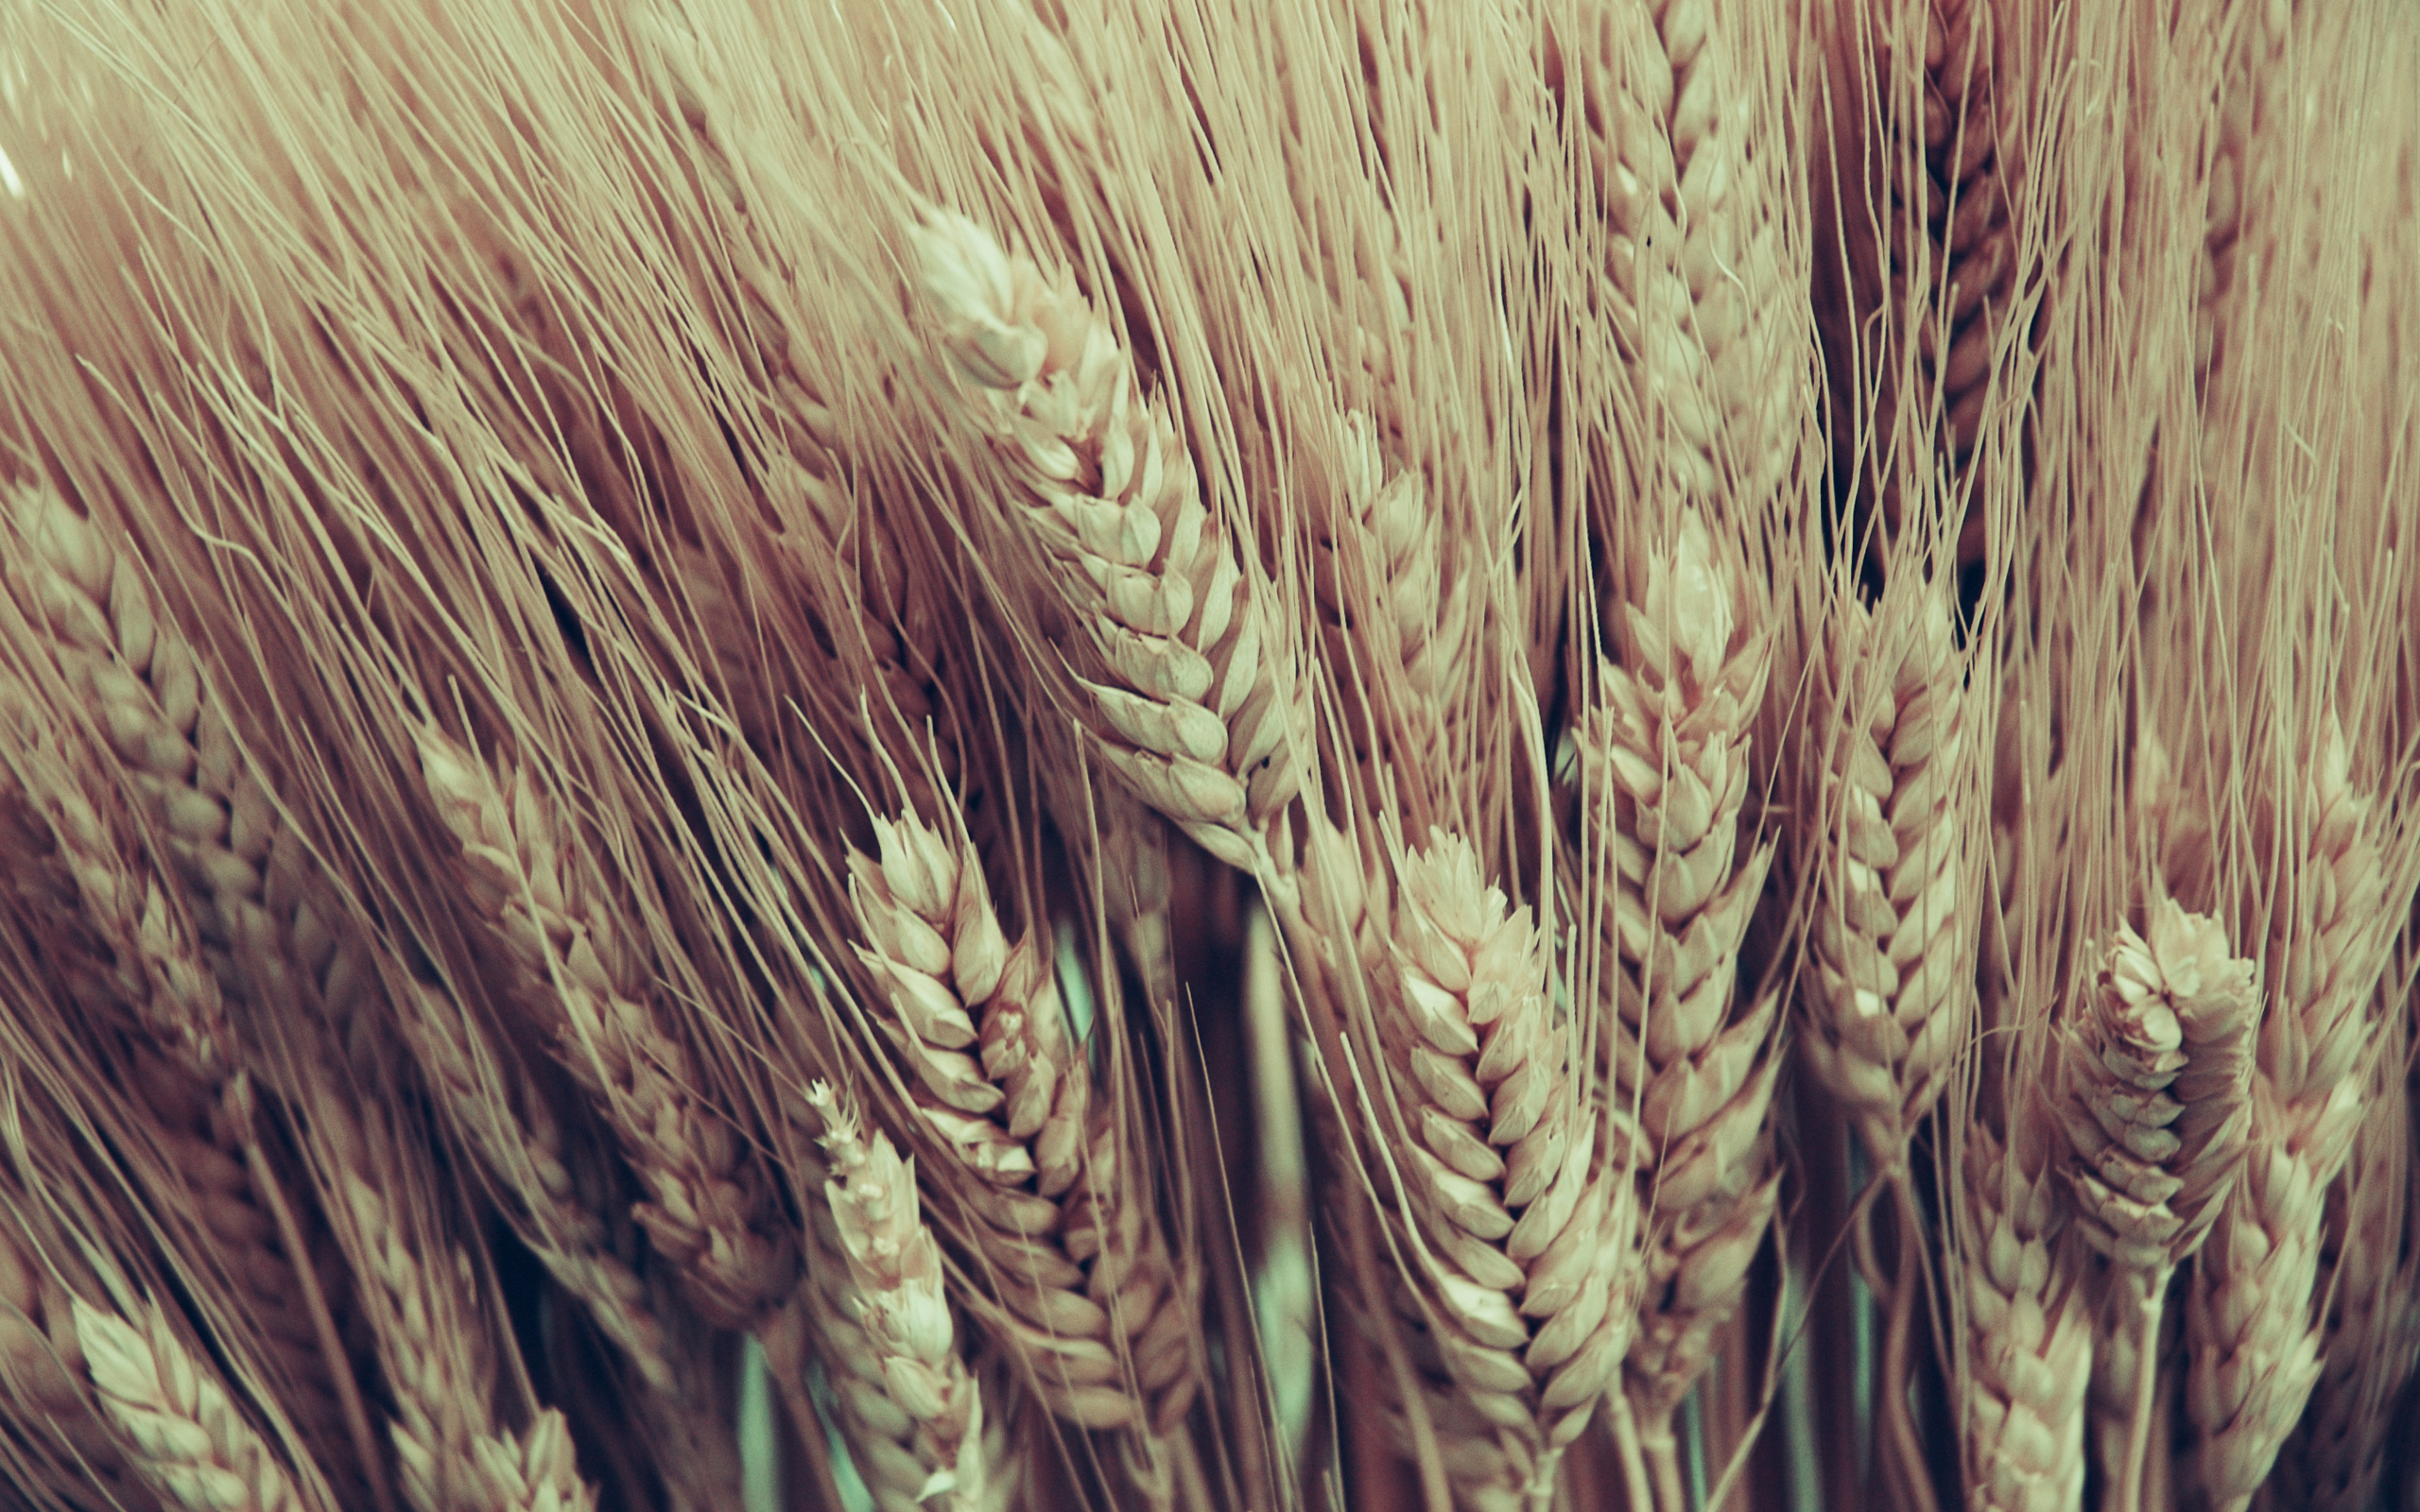 Earth Wheat HD Wallpaper | Background Image